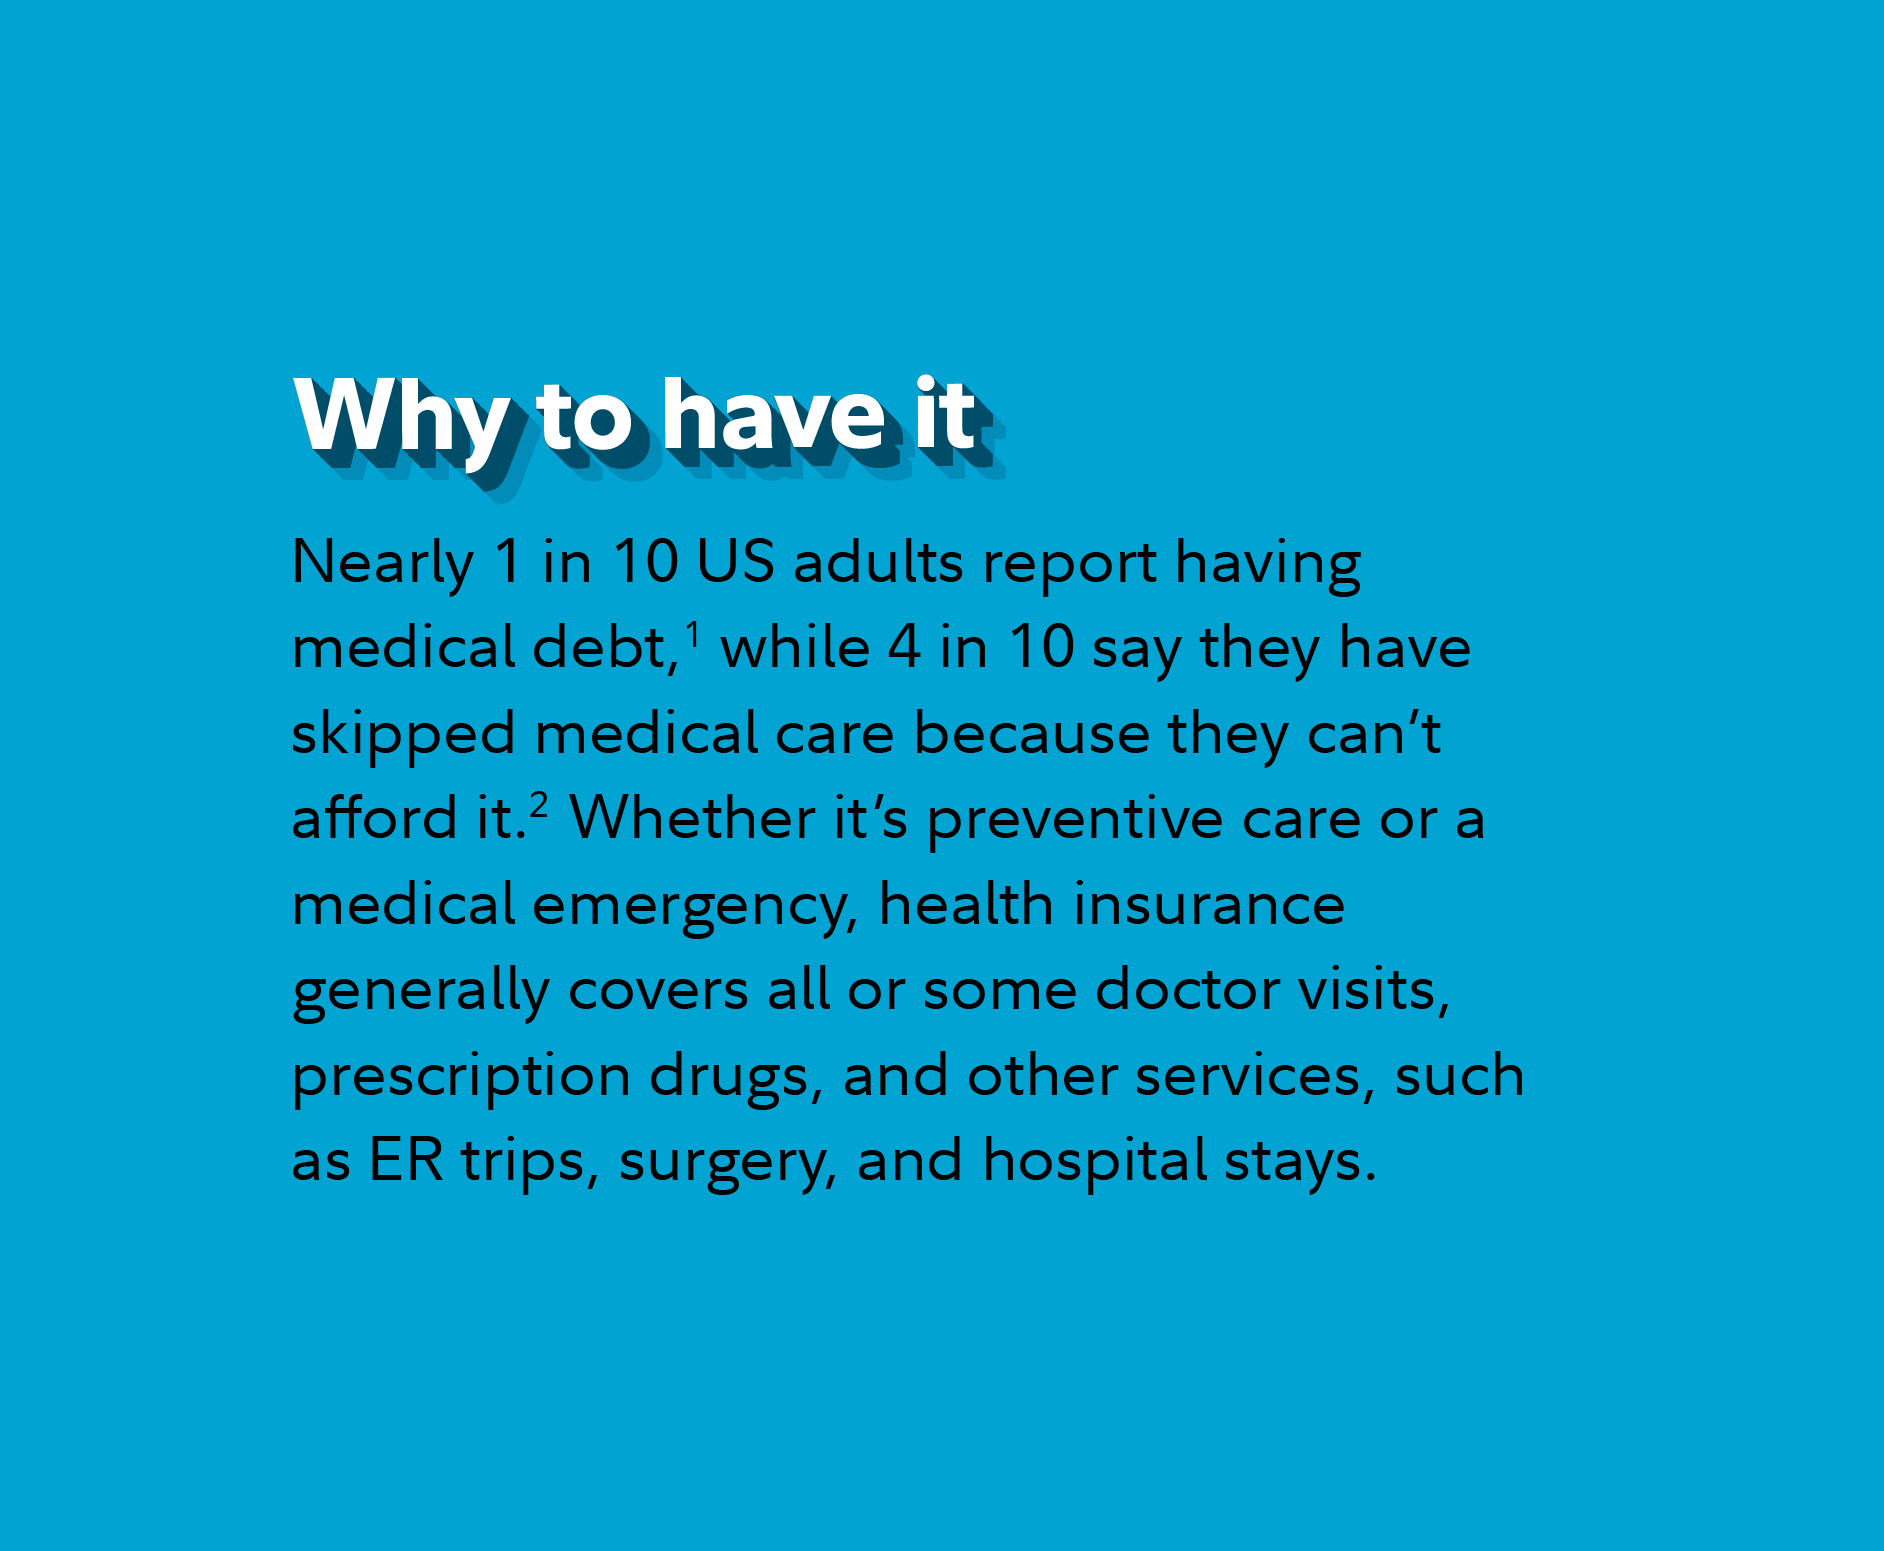 Why to have it? Nearly 1 in 10 US adults report owing medical debt,(Footnote 1 in complementary region) while 4 in 10 say they have skipped medical care because they can't afford it.(Footnote 2 in complementary region) Whether it's preventive care or a medical emergency, health insurance generally covers all or some doctor visits, prescription drugs, and other services, such as ER trips, surgery, and hospital stays.